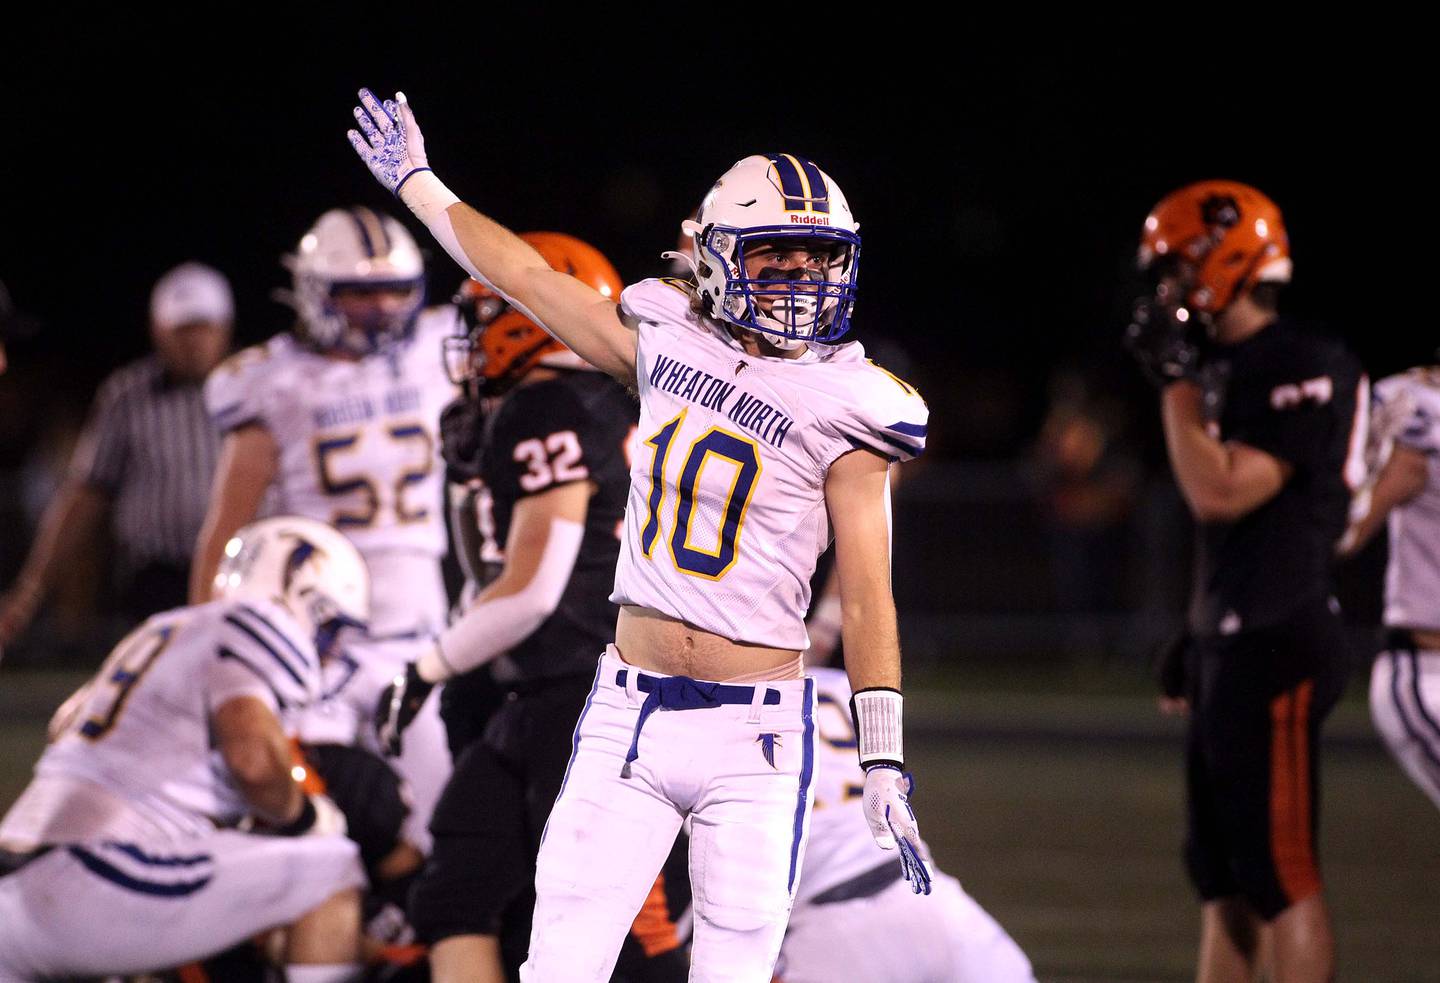 Wheaton North's Tyler O'Connor (10) celebrates a turnover during a game at Wheaton Warrenville South on Friday, Oct. 8, 2021.